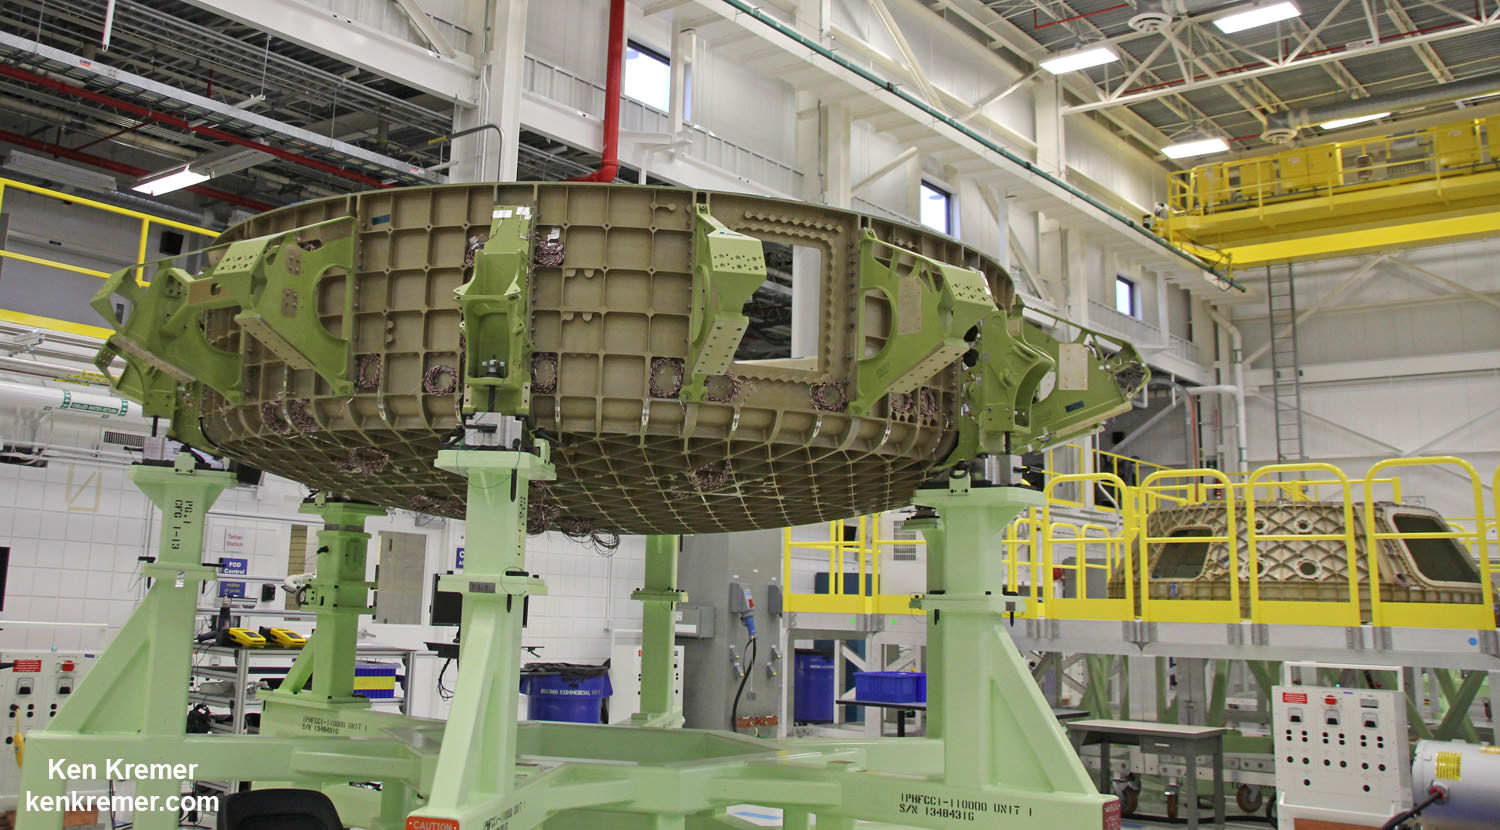 First view of the Boeing CST-100 'Starliner' crewed space taxi at the Sept. 4, 2015 Grand Opening ceremony held in the totally refurbished C3PF manufacturing facility at NASA's Kennedy Space Center. These are the upper and lower segments of the first Starliner crew module known as the Structural Test Article (STA) being built at Boeing’s Commercial Crew and Cargo Processing Facility (C3PF) at KSC. Credit: Ken Kremer /kenkremer.com